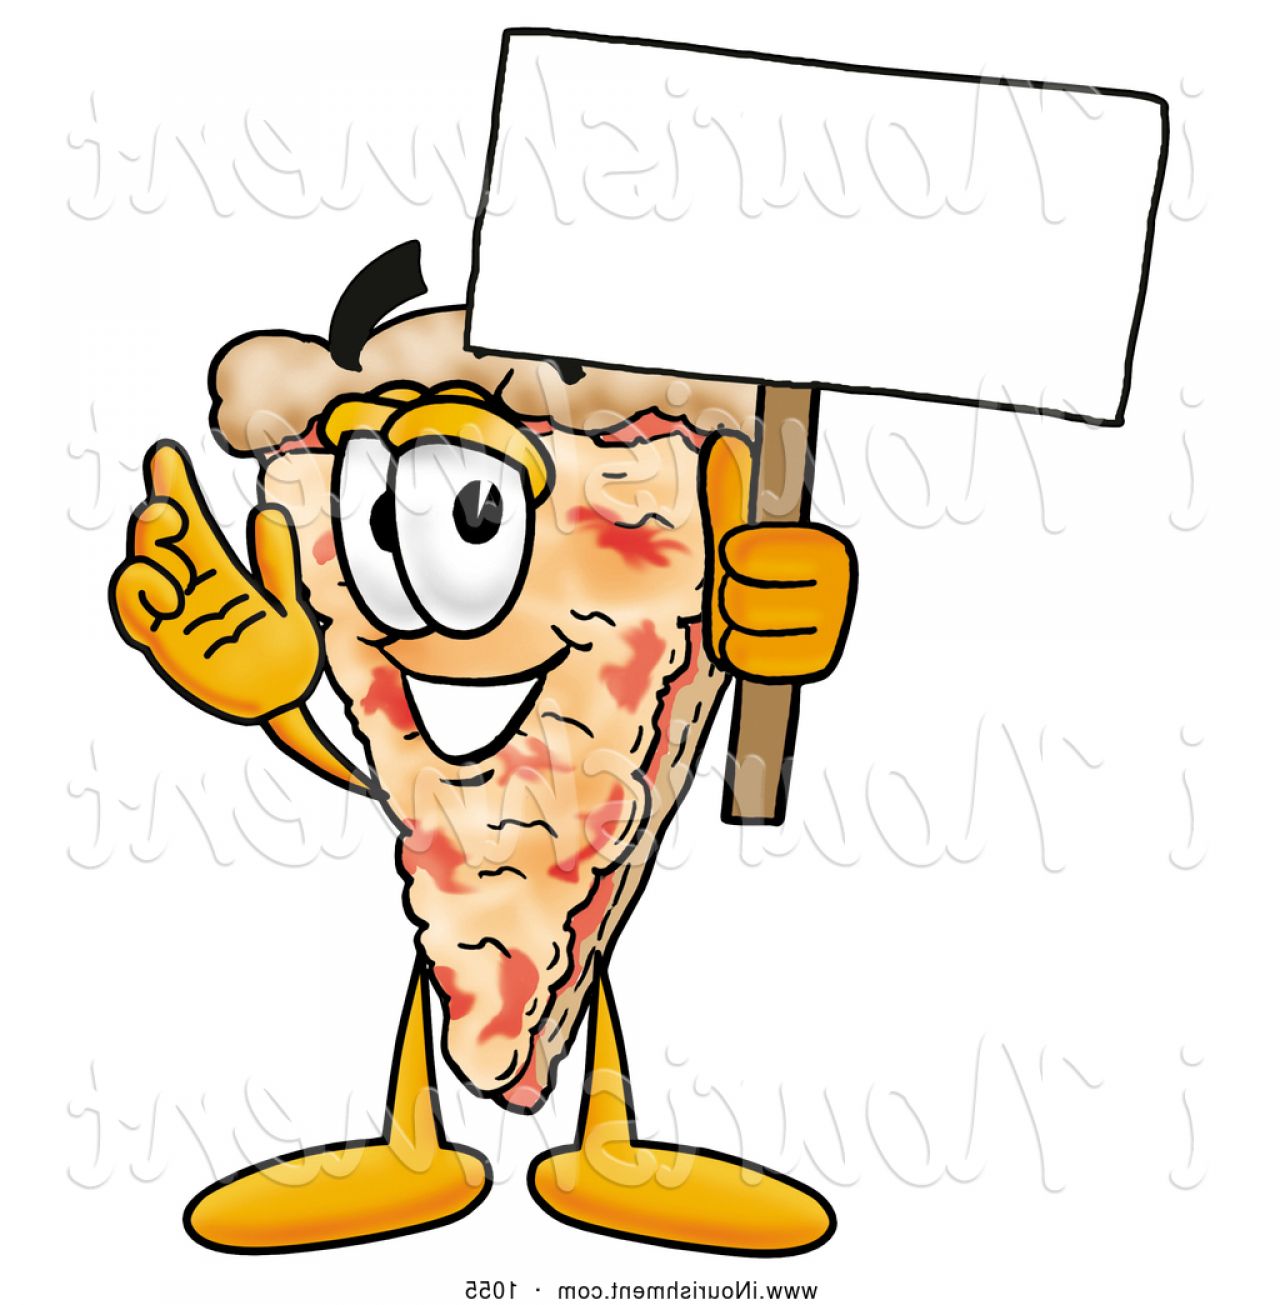 Clipart of Pizza Cartoon | Clipart Panda - Free Clipart Images